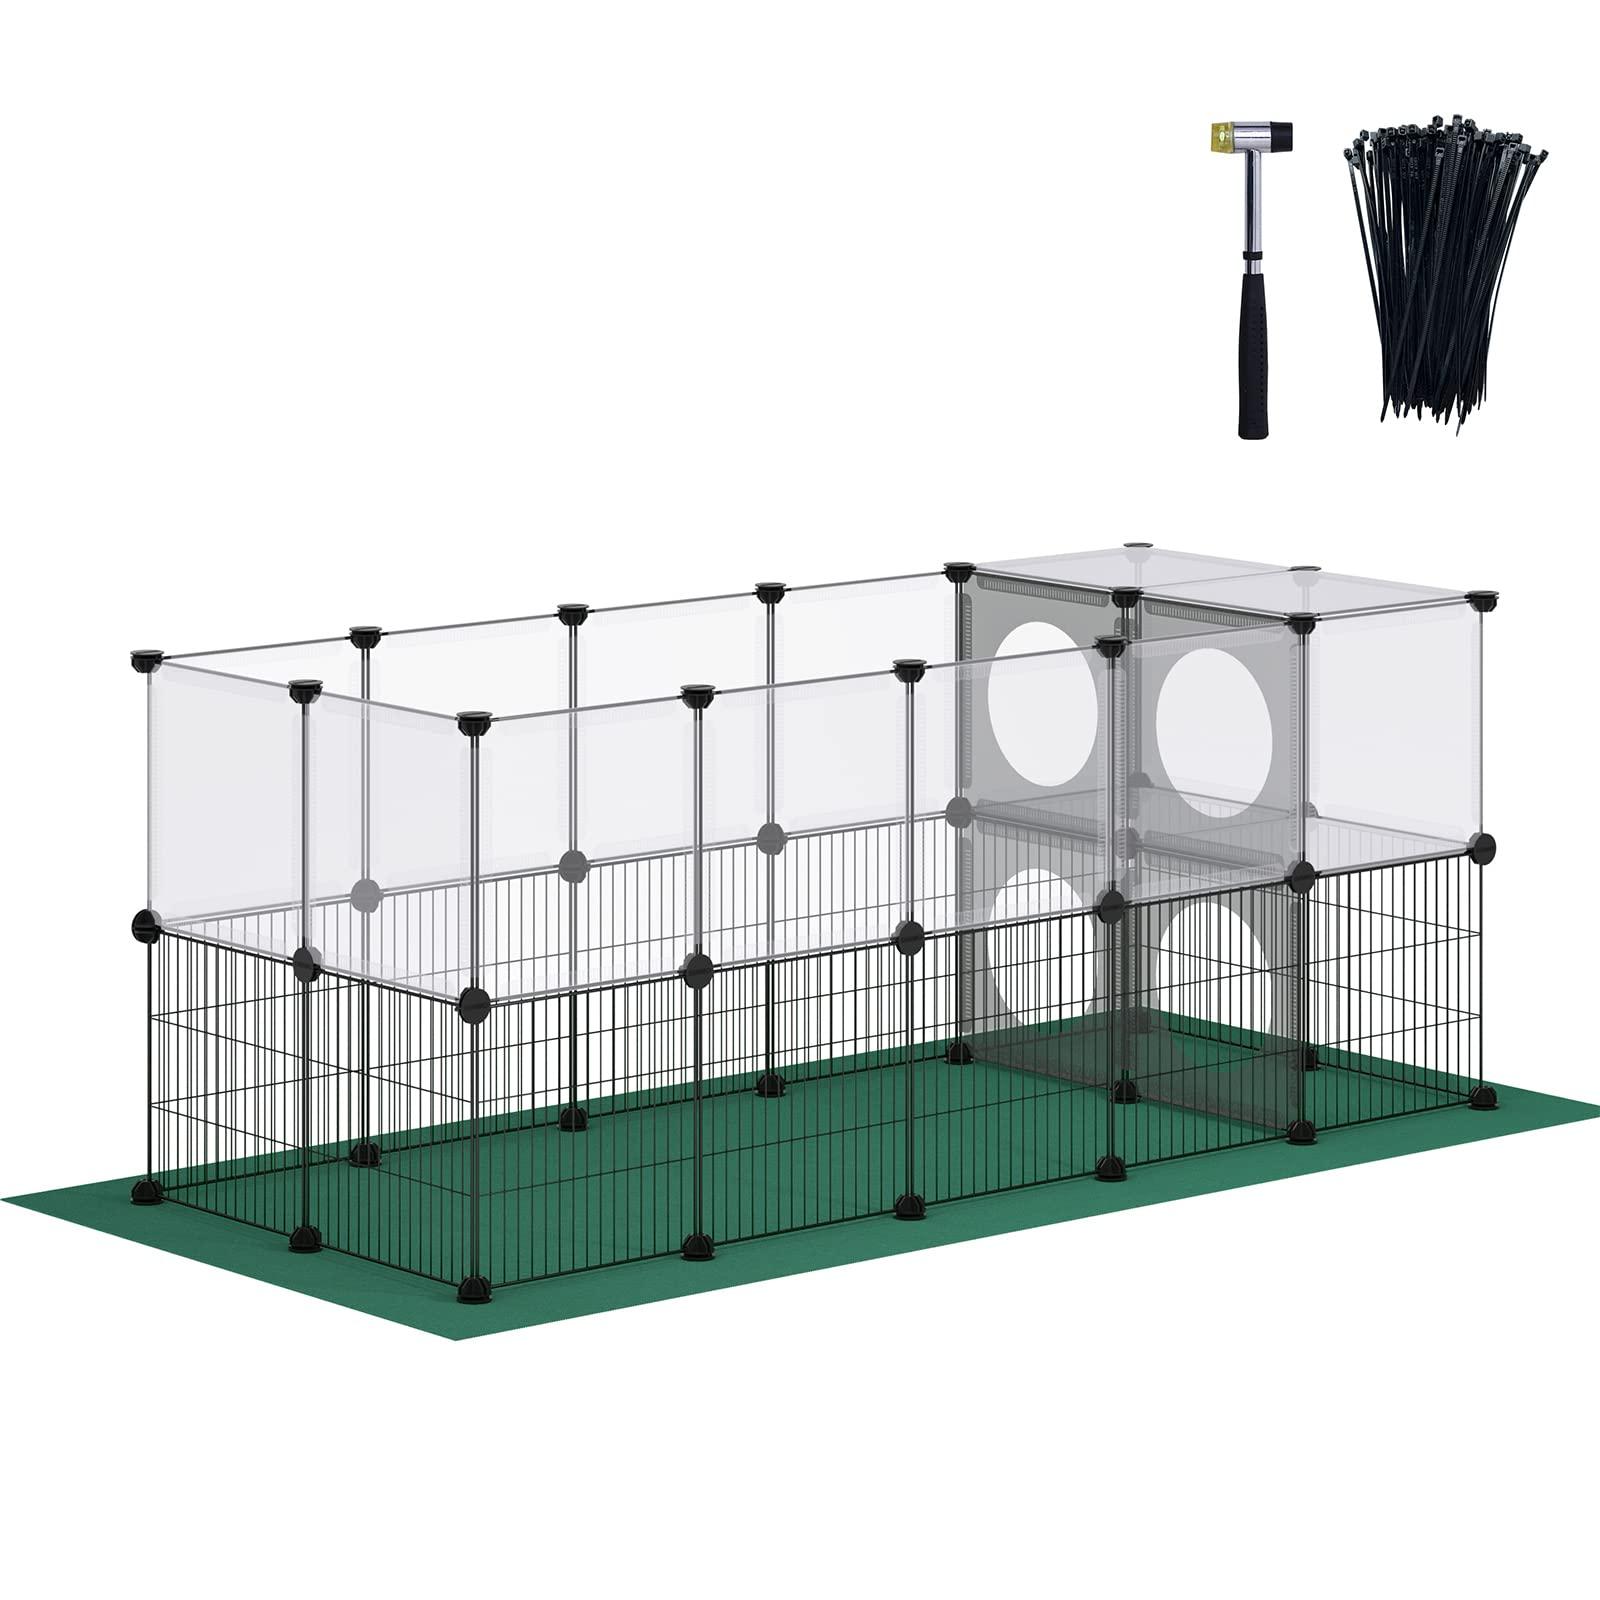 DINMO Small Animal Playpen with Oxford Mat, 24 inches Height, Pet Exercise Fence, Home Protector, Iron Mesh and Plastic Combination, Visualization, DIY, Games Hole Series, 60.2 x 24.8 x 24.8inch